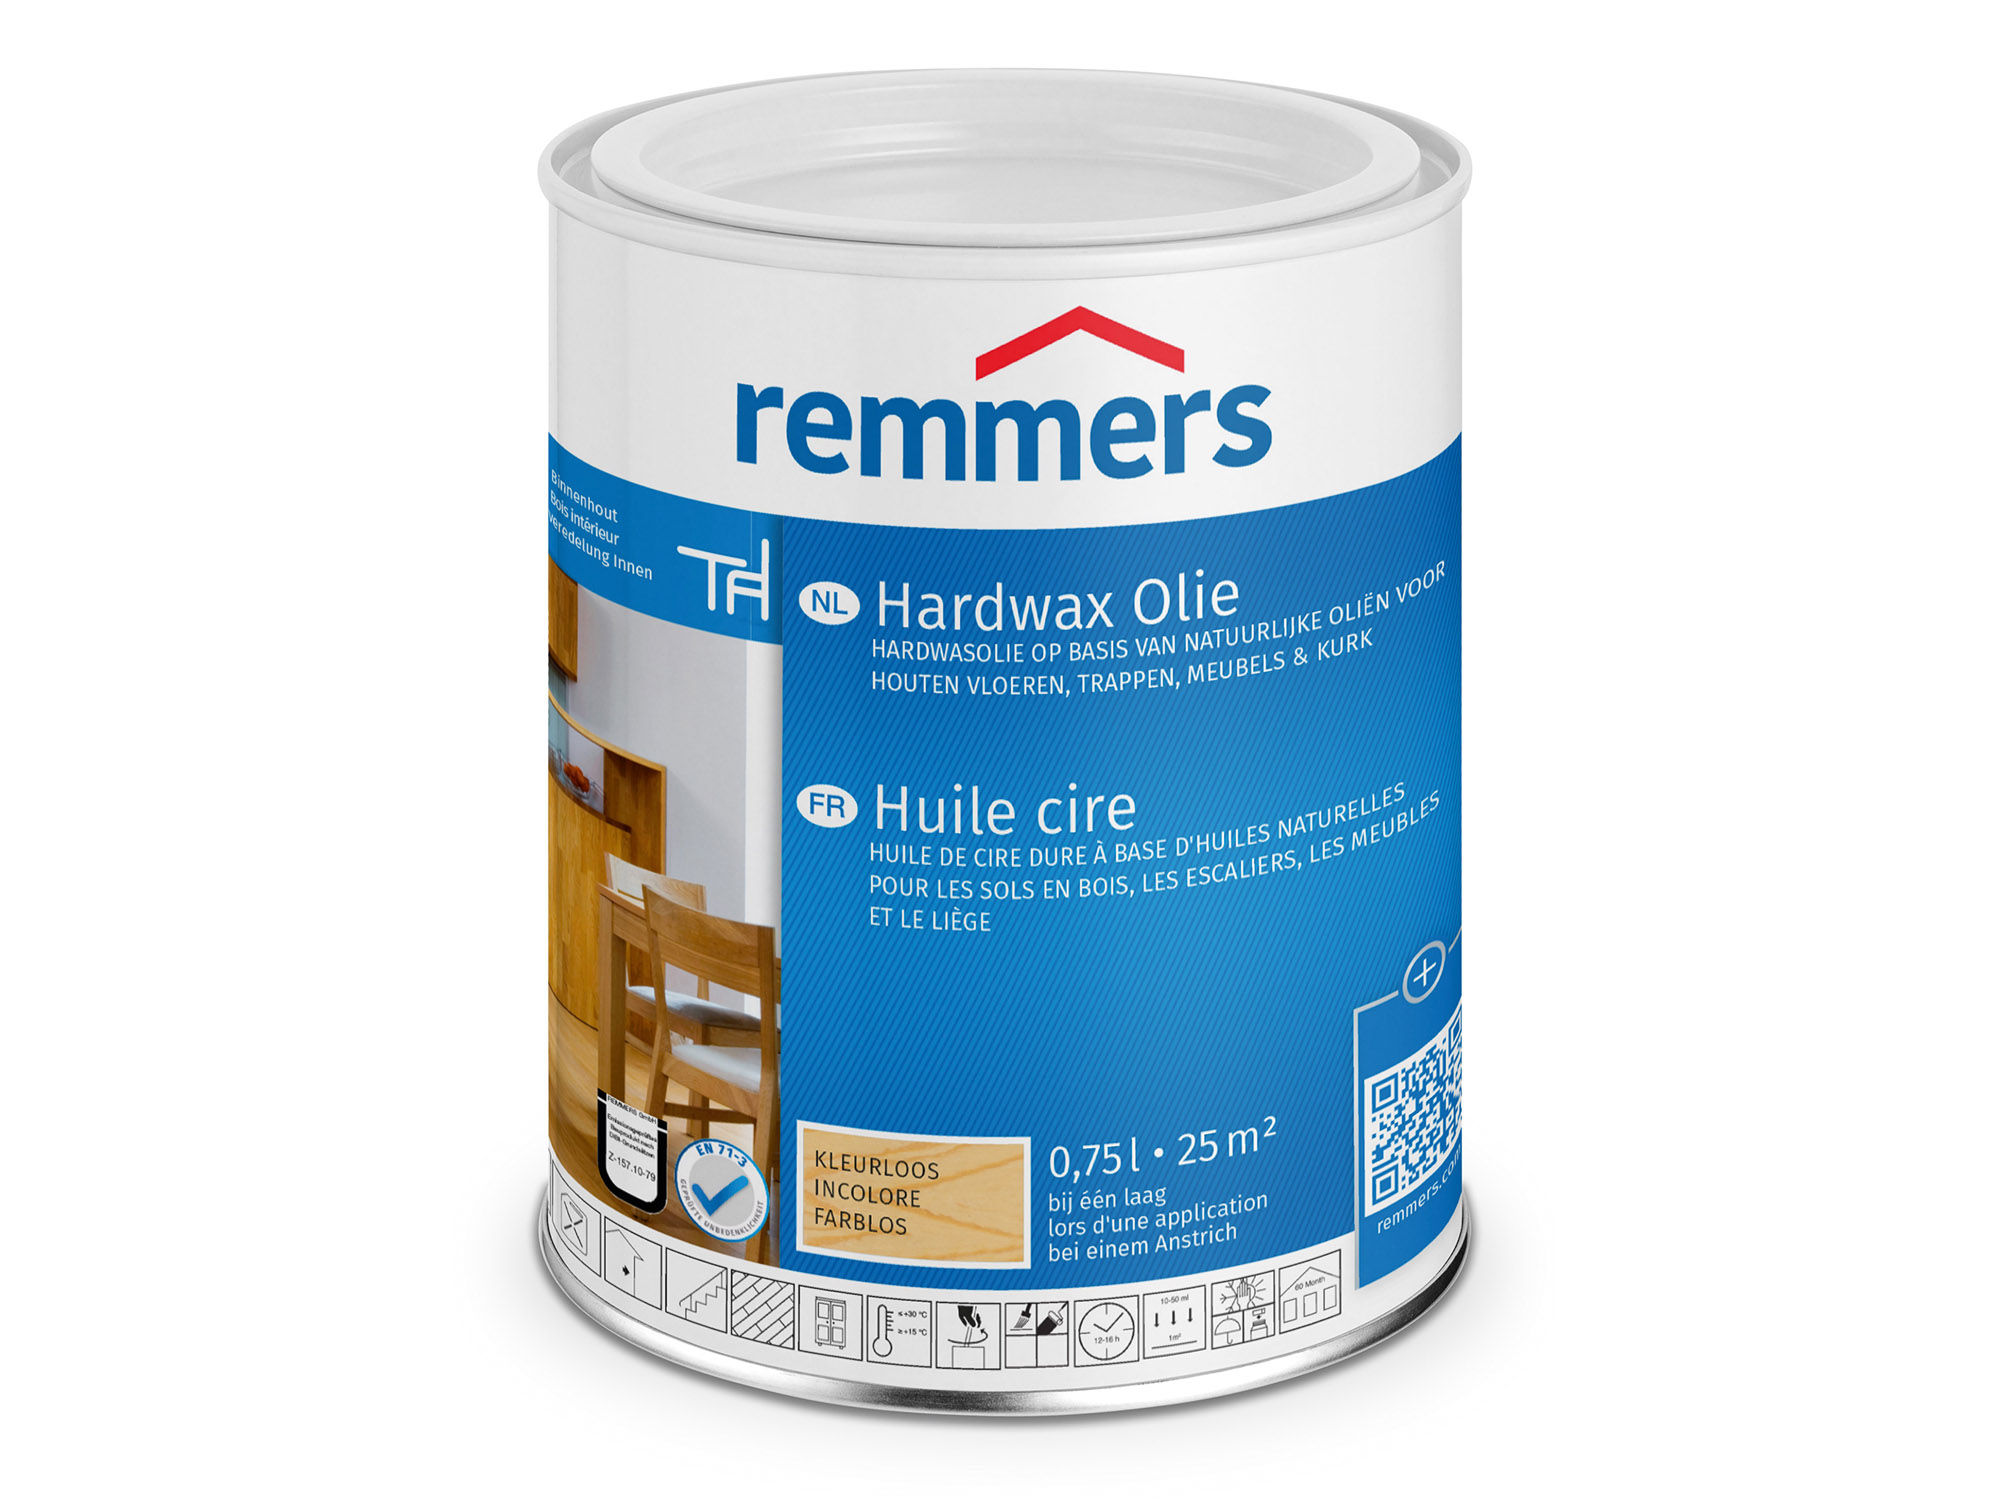 Remmers Hardwax Olie